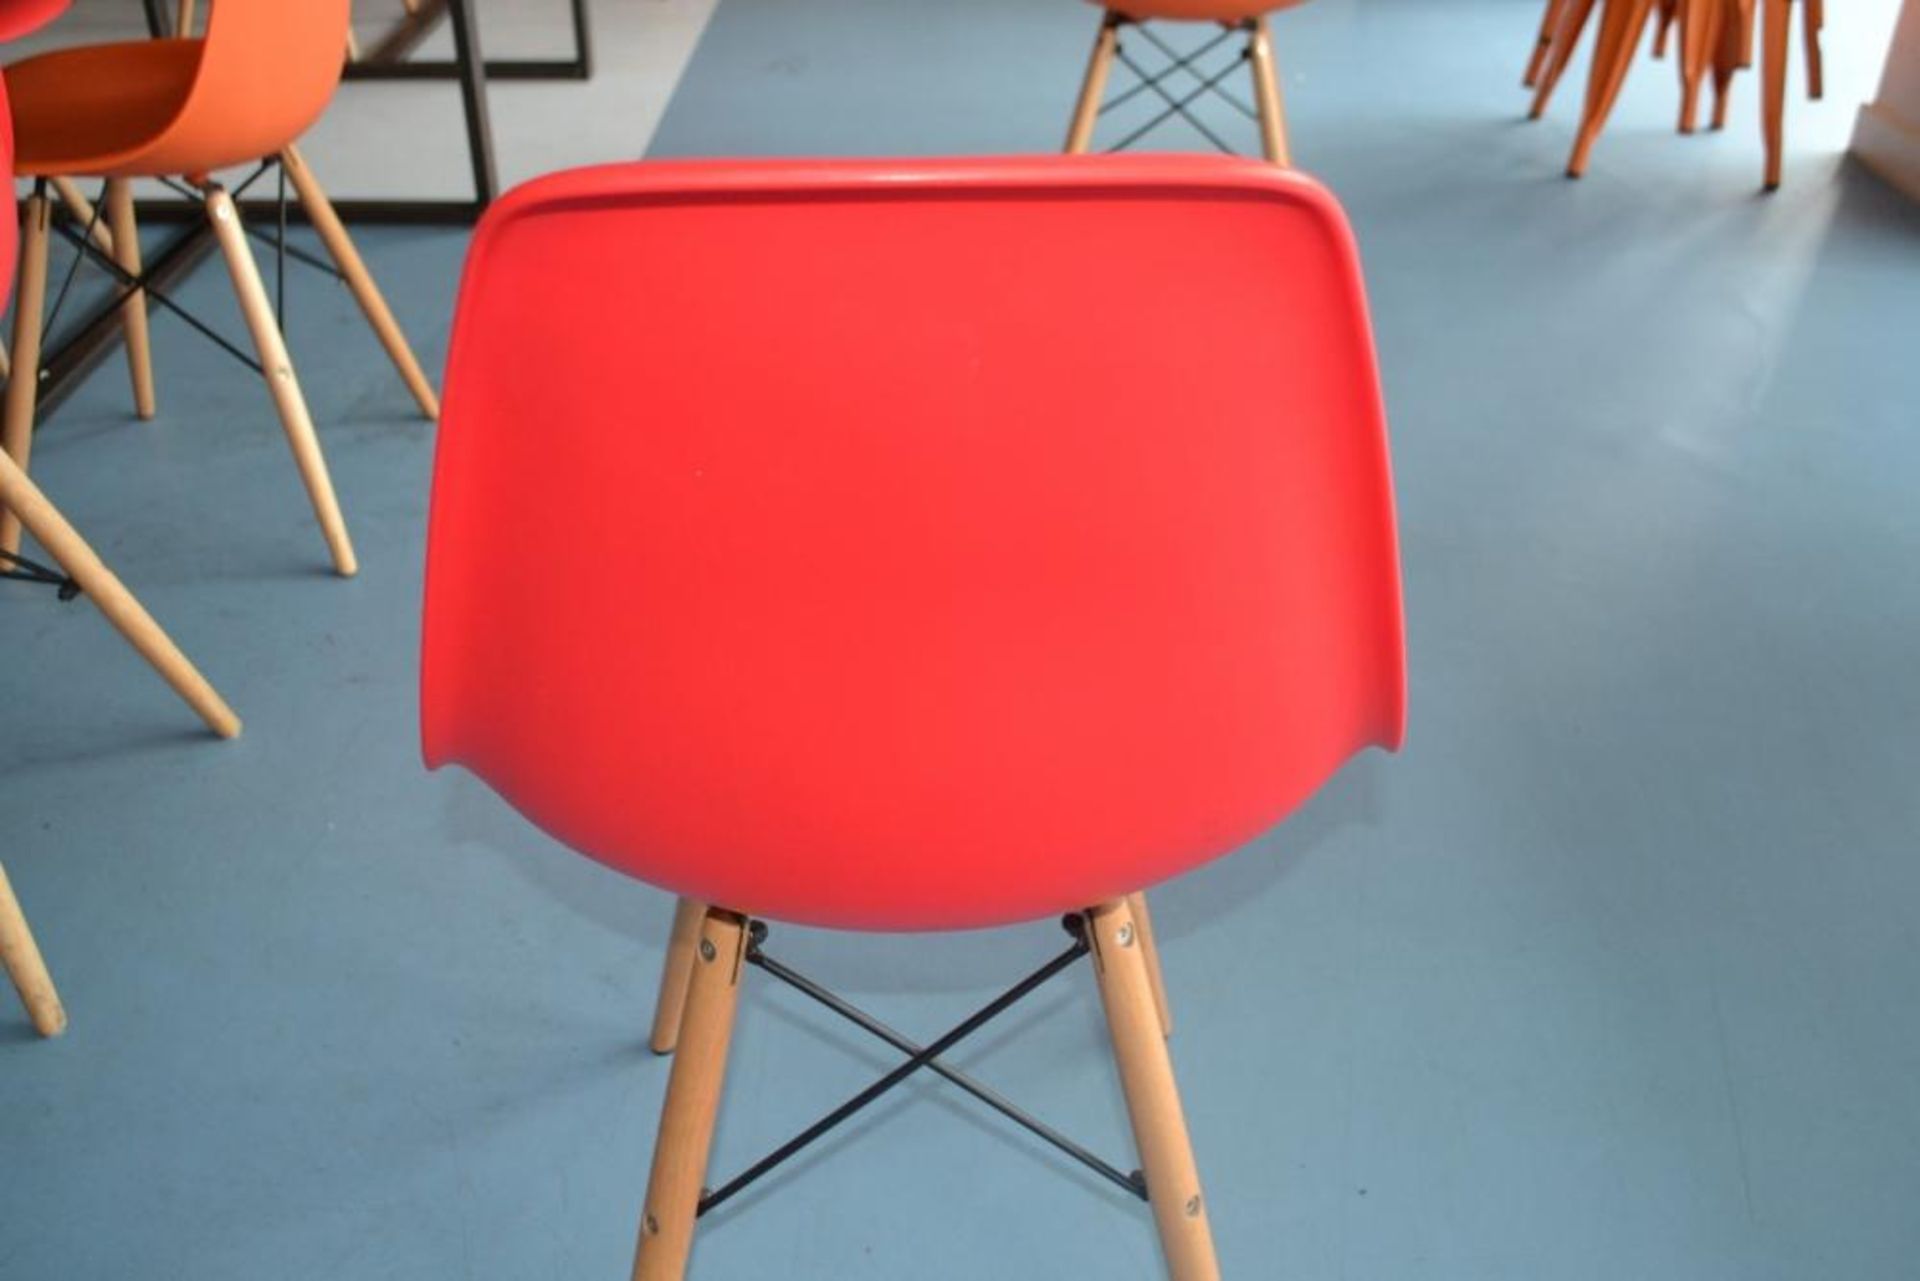 12 x Children's Orange and Red Charles and Ray Eames Style Shell Chairs - CL425 - Location: Altrinch - Image 7 of 8